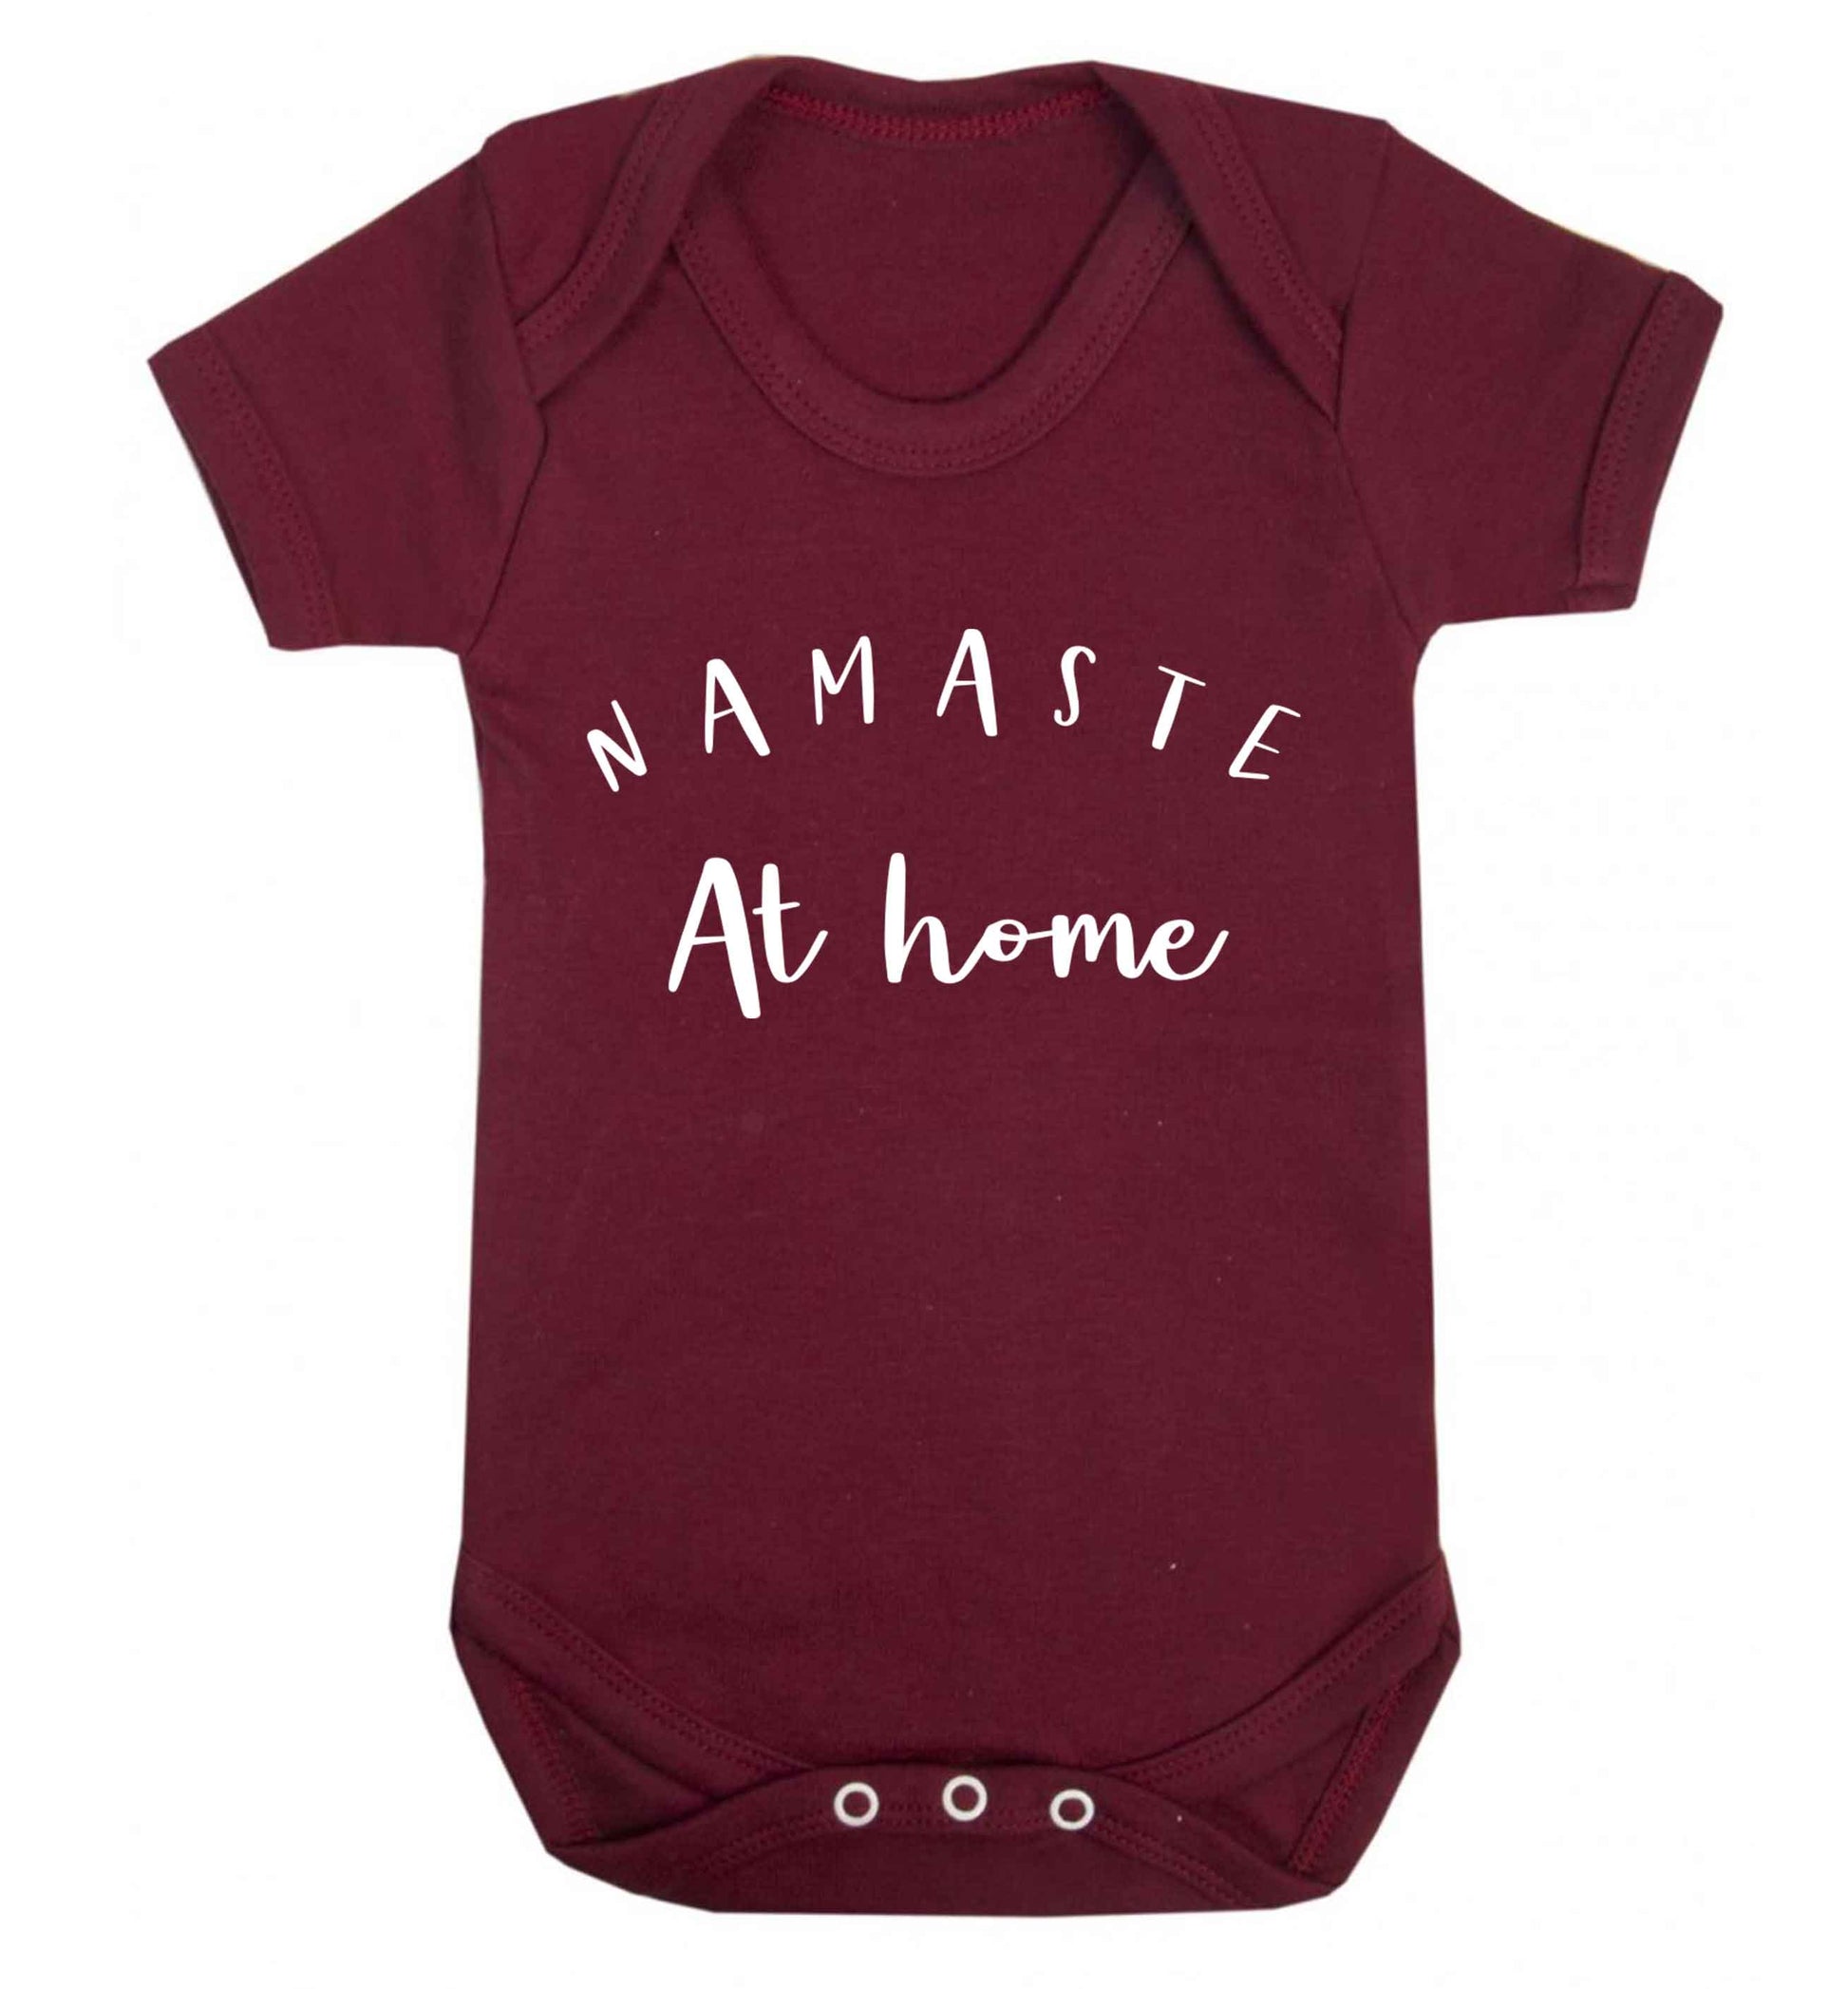 Namaste at home Baby Vest maroon 18-24 months